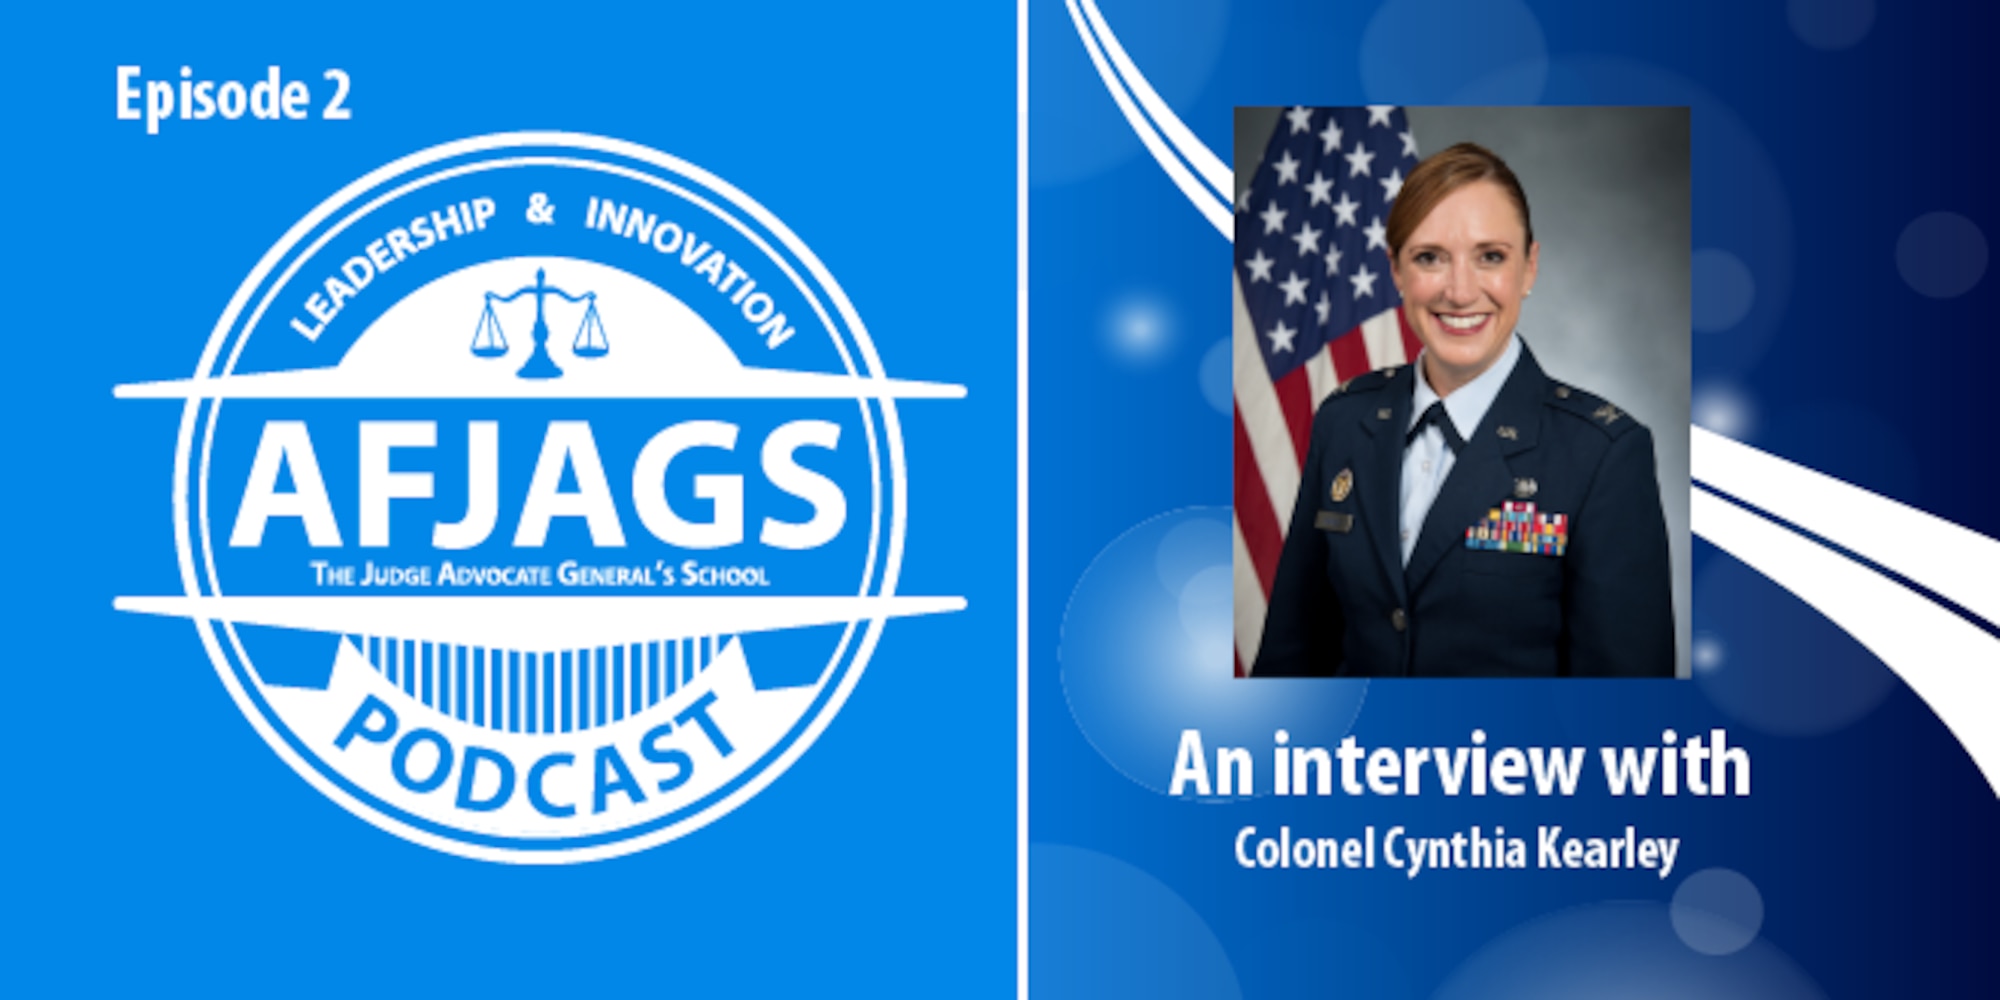 AFJAGS Podcast Episode 2, an interview with Colonel Cynthia Kearley – Part 1